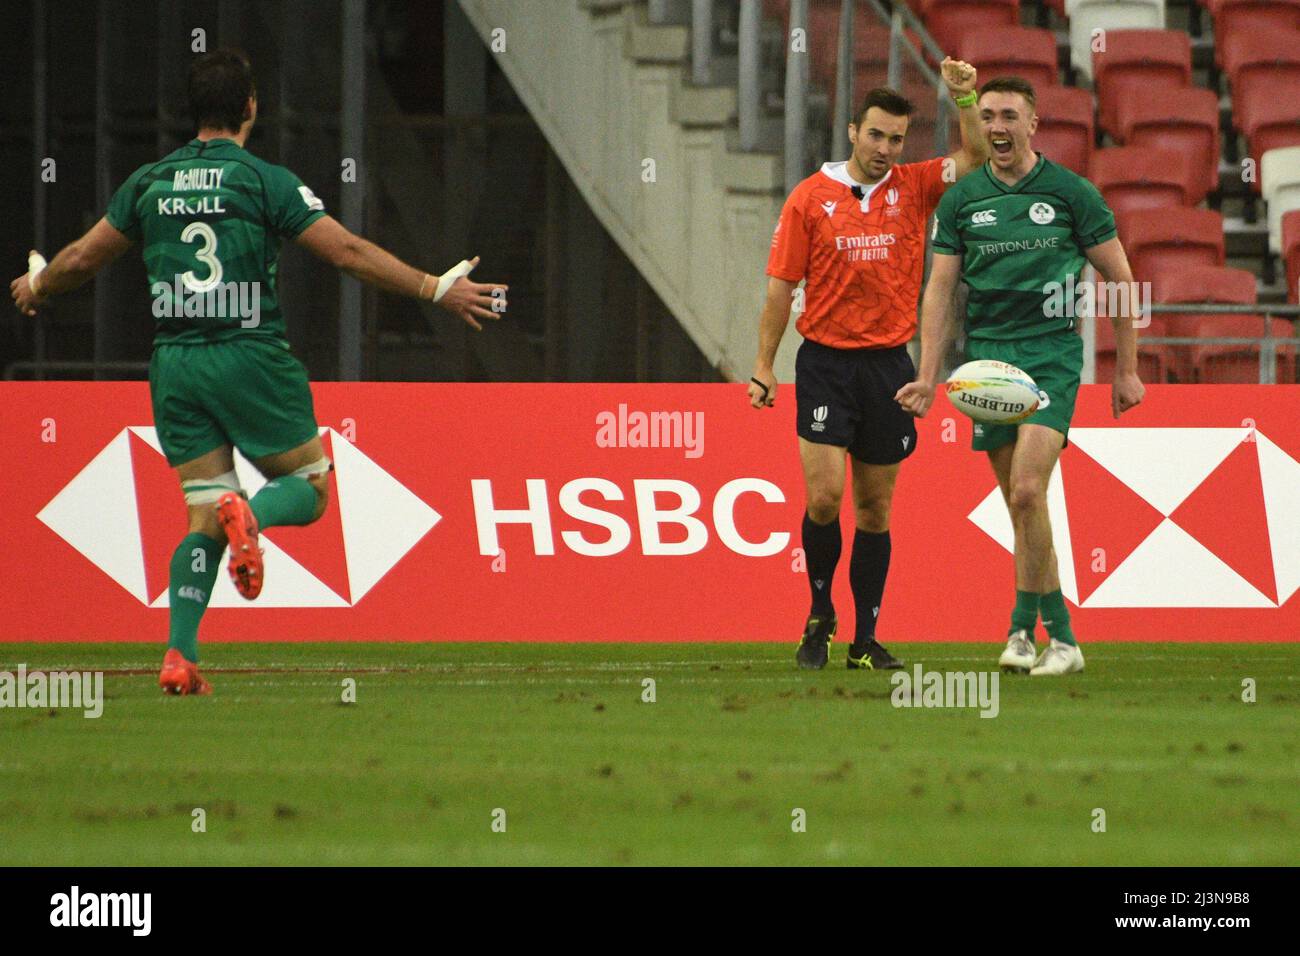 Singapore. 9th Apr, 2022. Terry Kennedy (R) of Ireland reacts on scoring a try during the Pool D match between Ireland and Fiji at the HSBC World Rugby Sevens Singapore stop, held in the National Stadium on April 9, 2022. Credit: Then Chih Wey/Xinhua/Alamy Live News Stock Photo